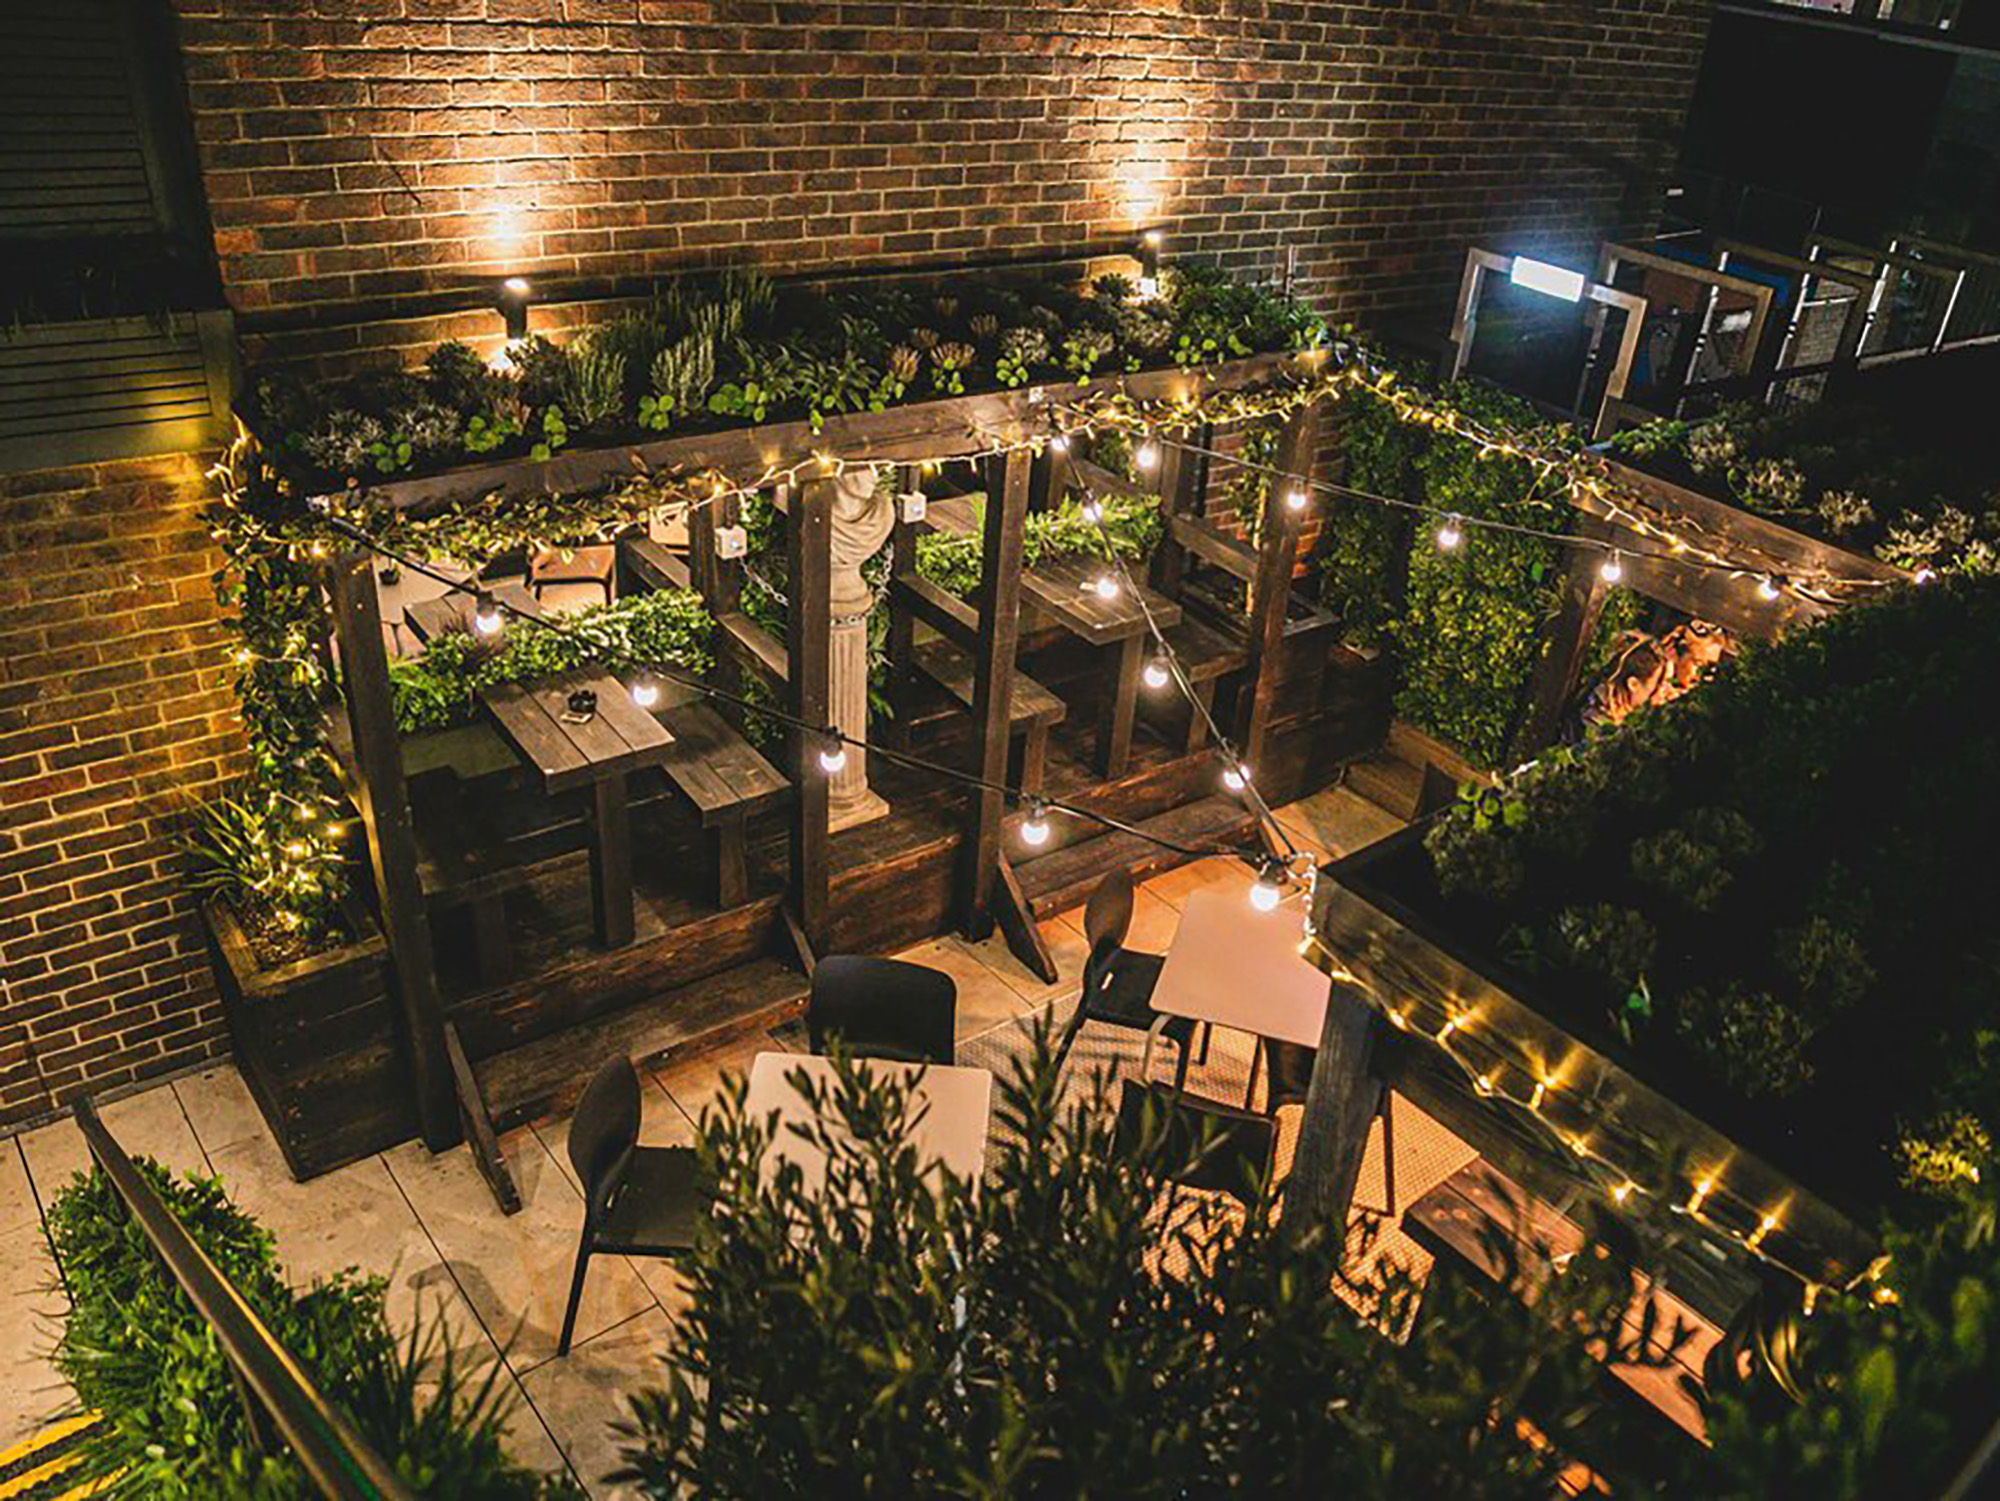 Oculist Brighton roof garden with plants and fairy lights. Night time setting, the outdoor terrace is next to a tall red brick wall. There are wooden tables under pagodas and plastic tables and chairs on the medium sized terrace. 